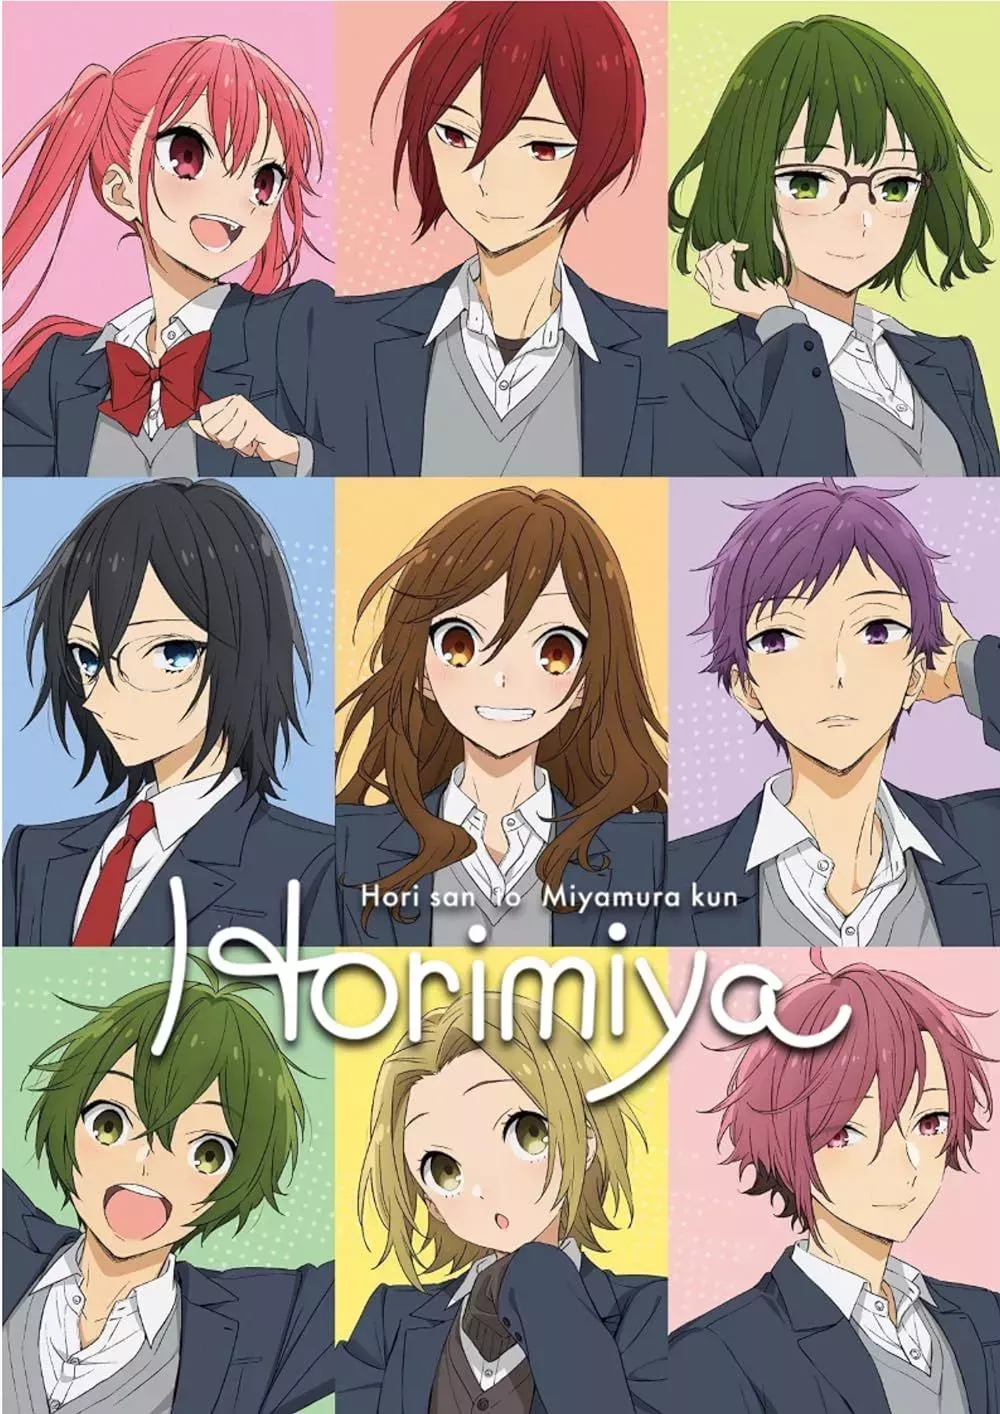 All the characters in their own colored boxes smiling and posing on Horimiya anime poster